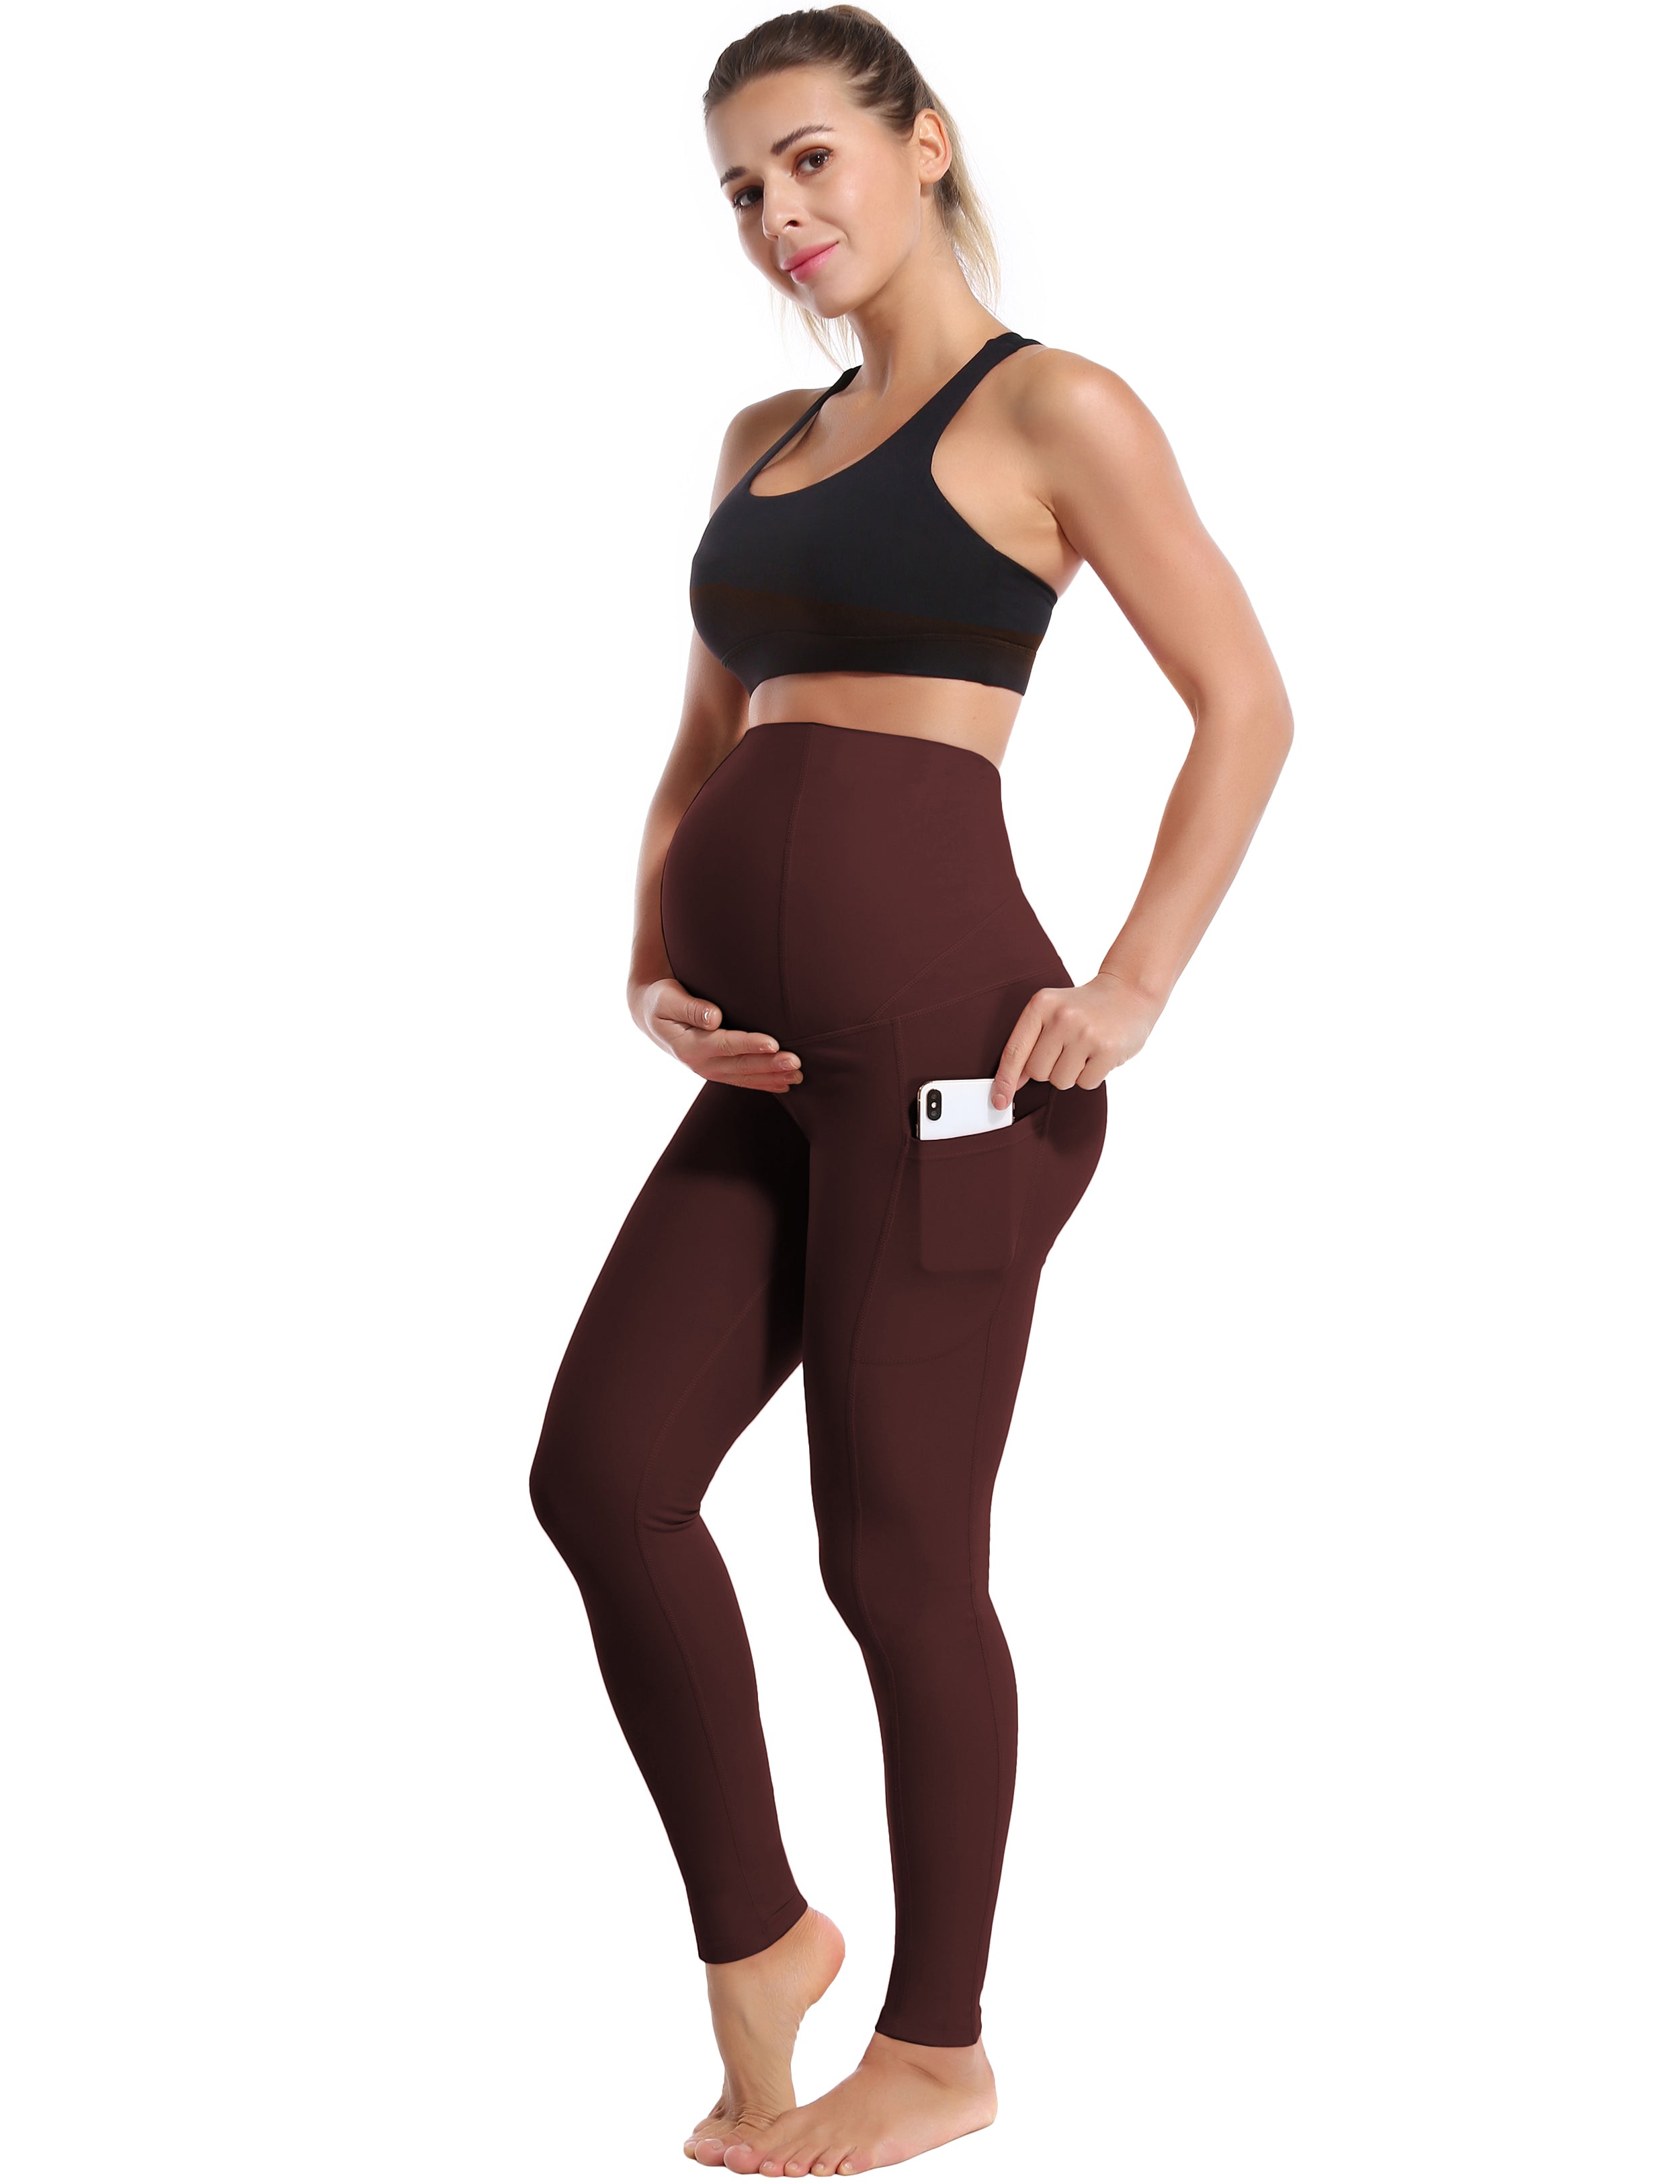 26" Side Pockets Maternity Tall Size Pants mahoganymaroon 87%Nylon/13%Spandex Softest-ever fabric High elasticity 4-way stretch Fabric doesn't attract lint easily No see-through Moisture-wicking Machine wash